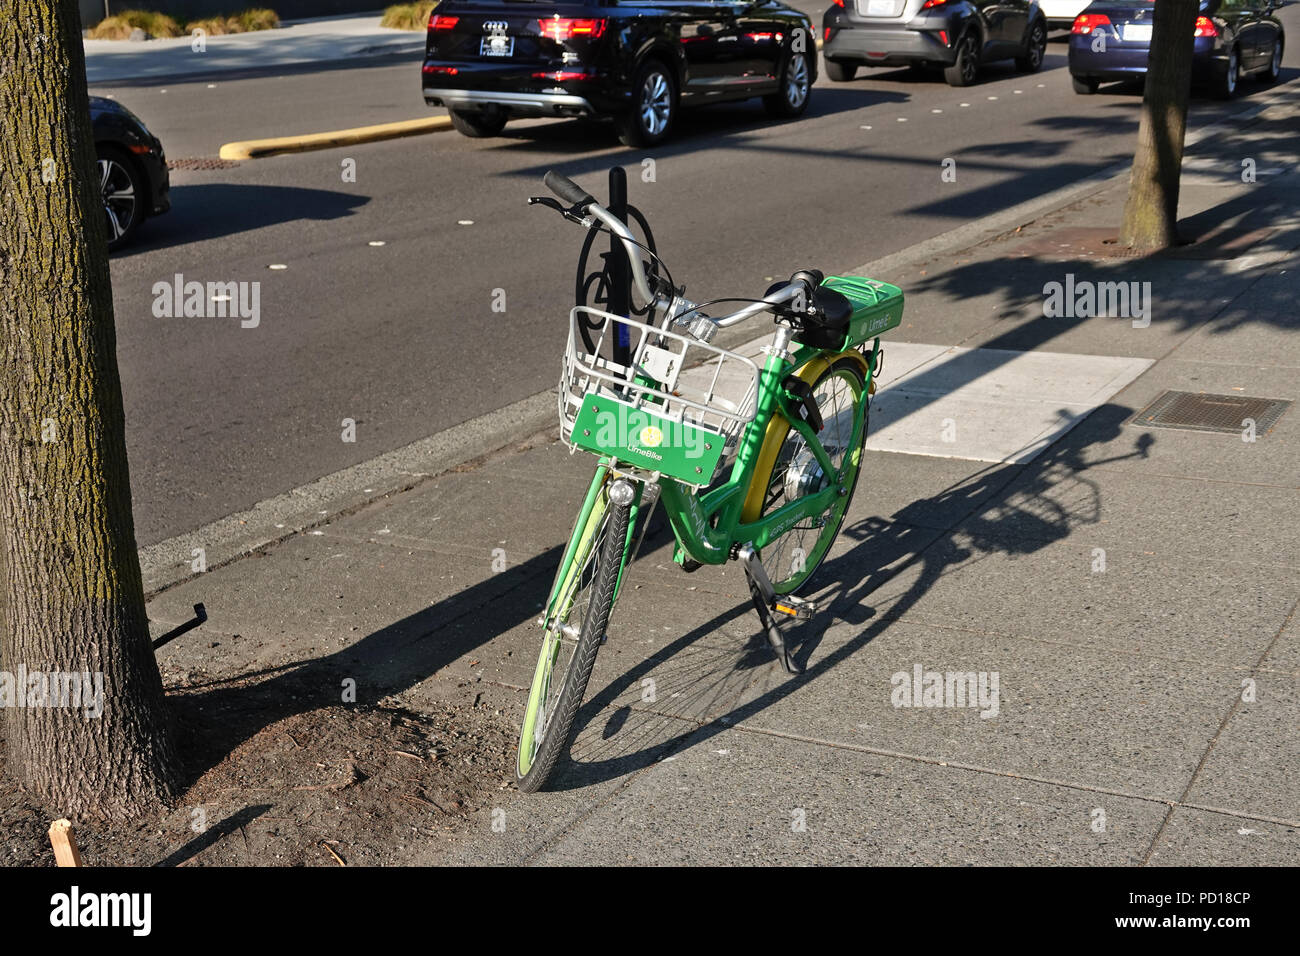 LimeBike E+ rental electric bicycle parked on a street in Bellevue, WA, USA; August 2018 Stock Photo